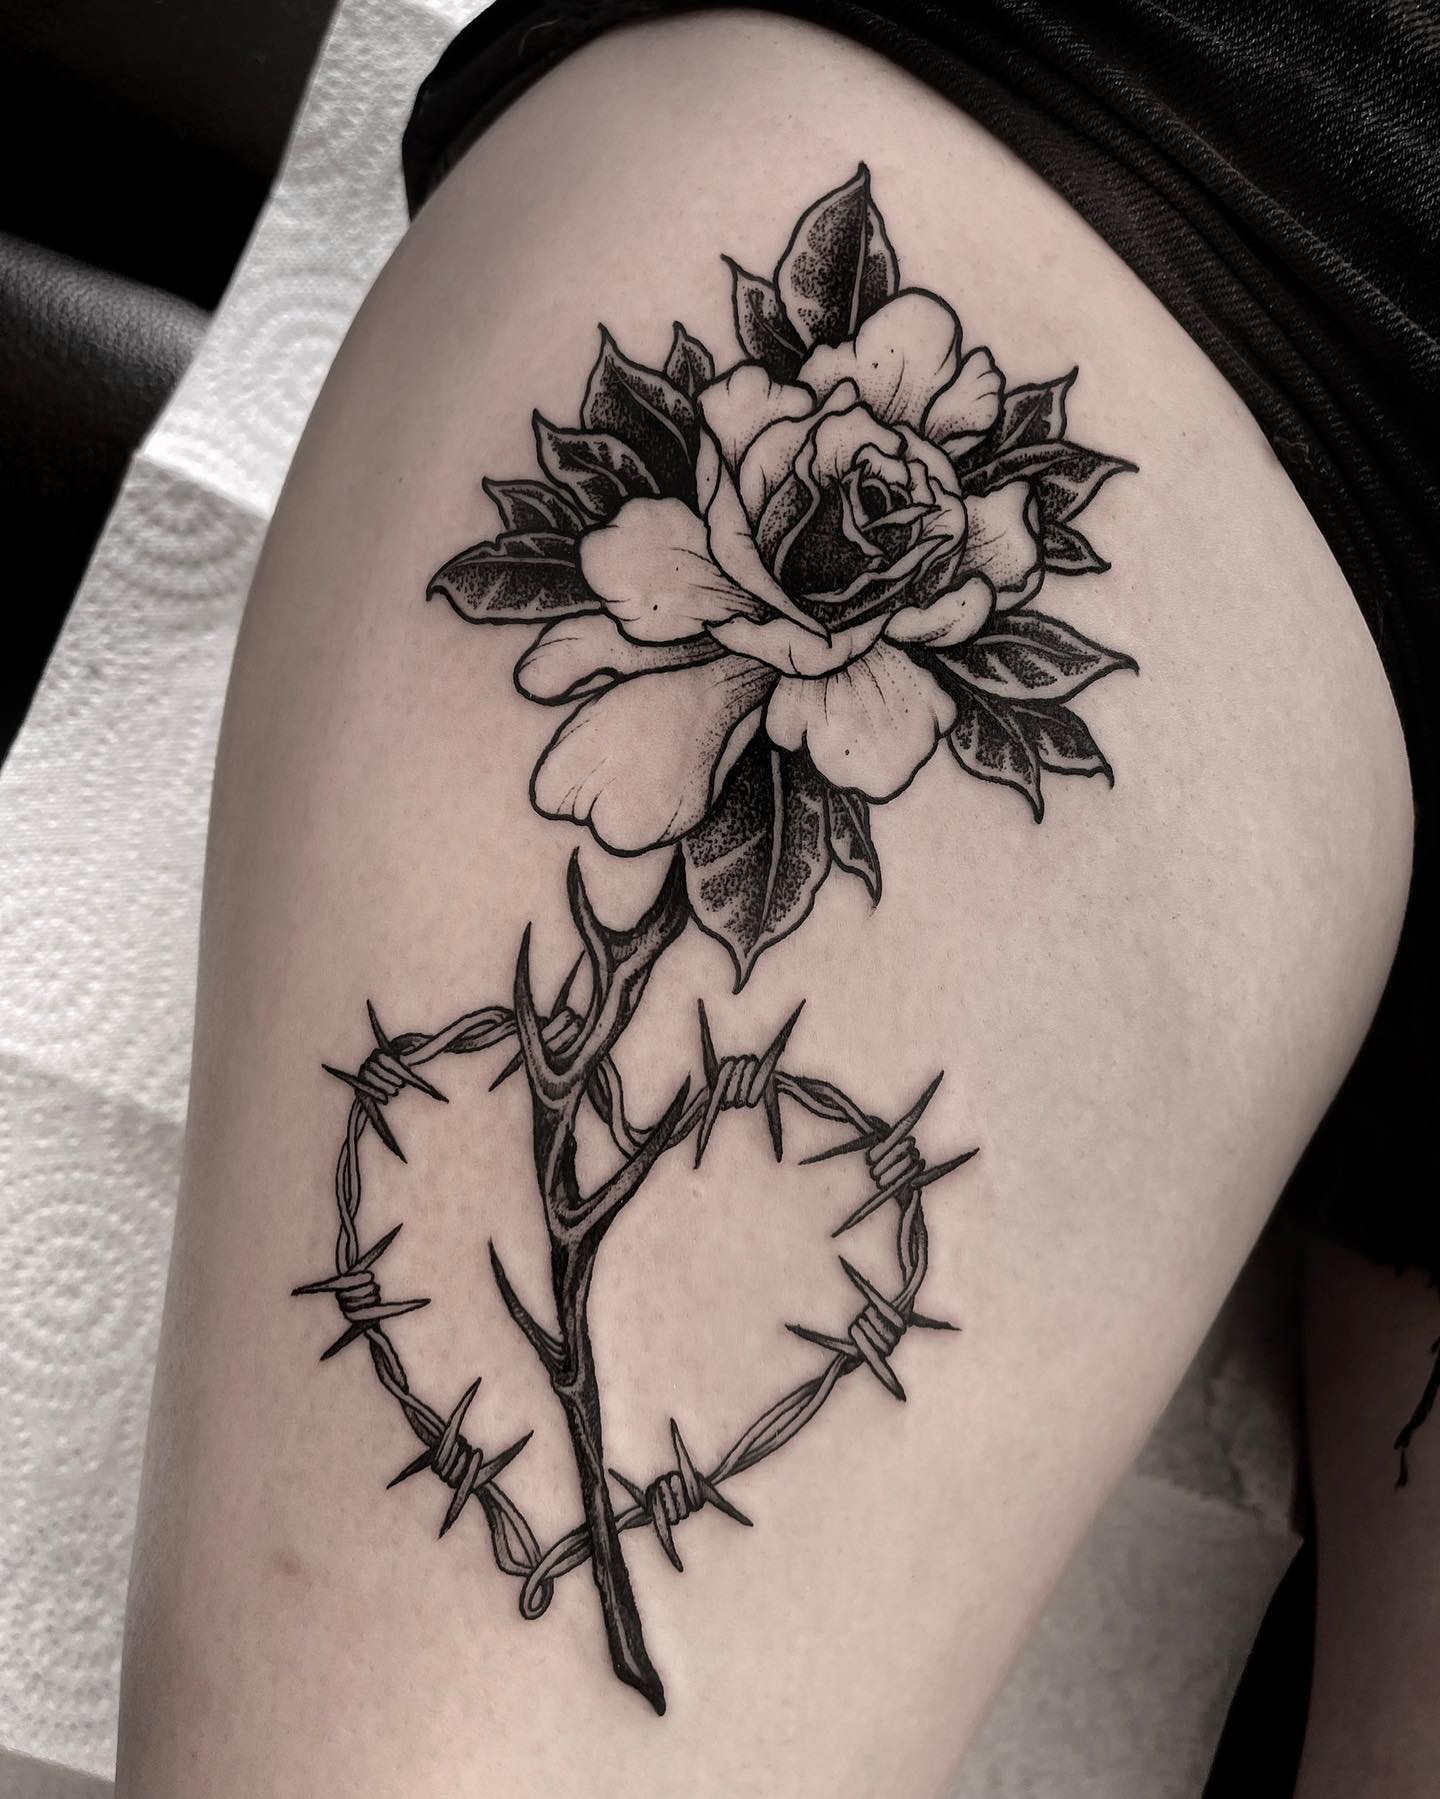 Rose thorns represent that nothing is perfect. Every beautiful thing in this world has a negative side and we should all be aware of that. In this tattoo, heart shape barbed wire is combined with rose thorns. The barbs and thorns may symbolize that every love is not perfect.